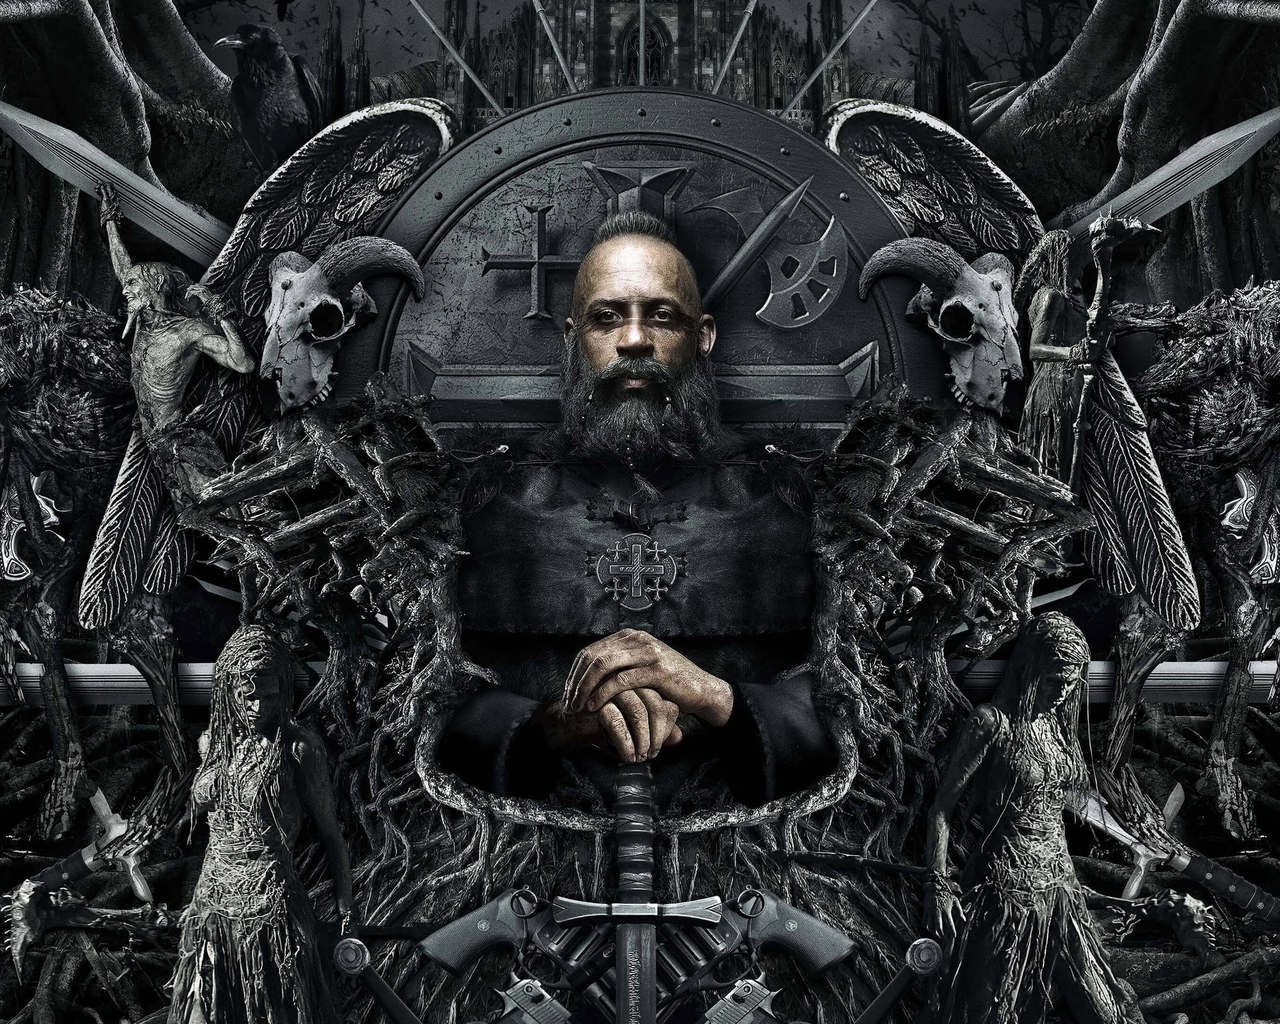 The Last Witch Hunter Throne for 1280 x 1024 resolution